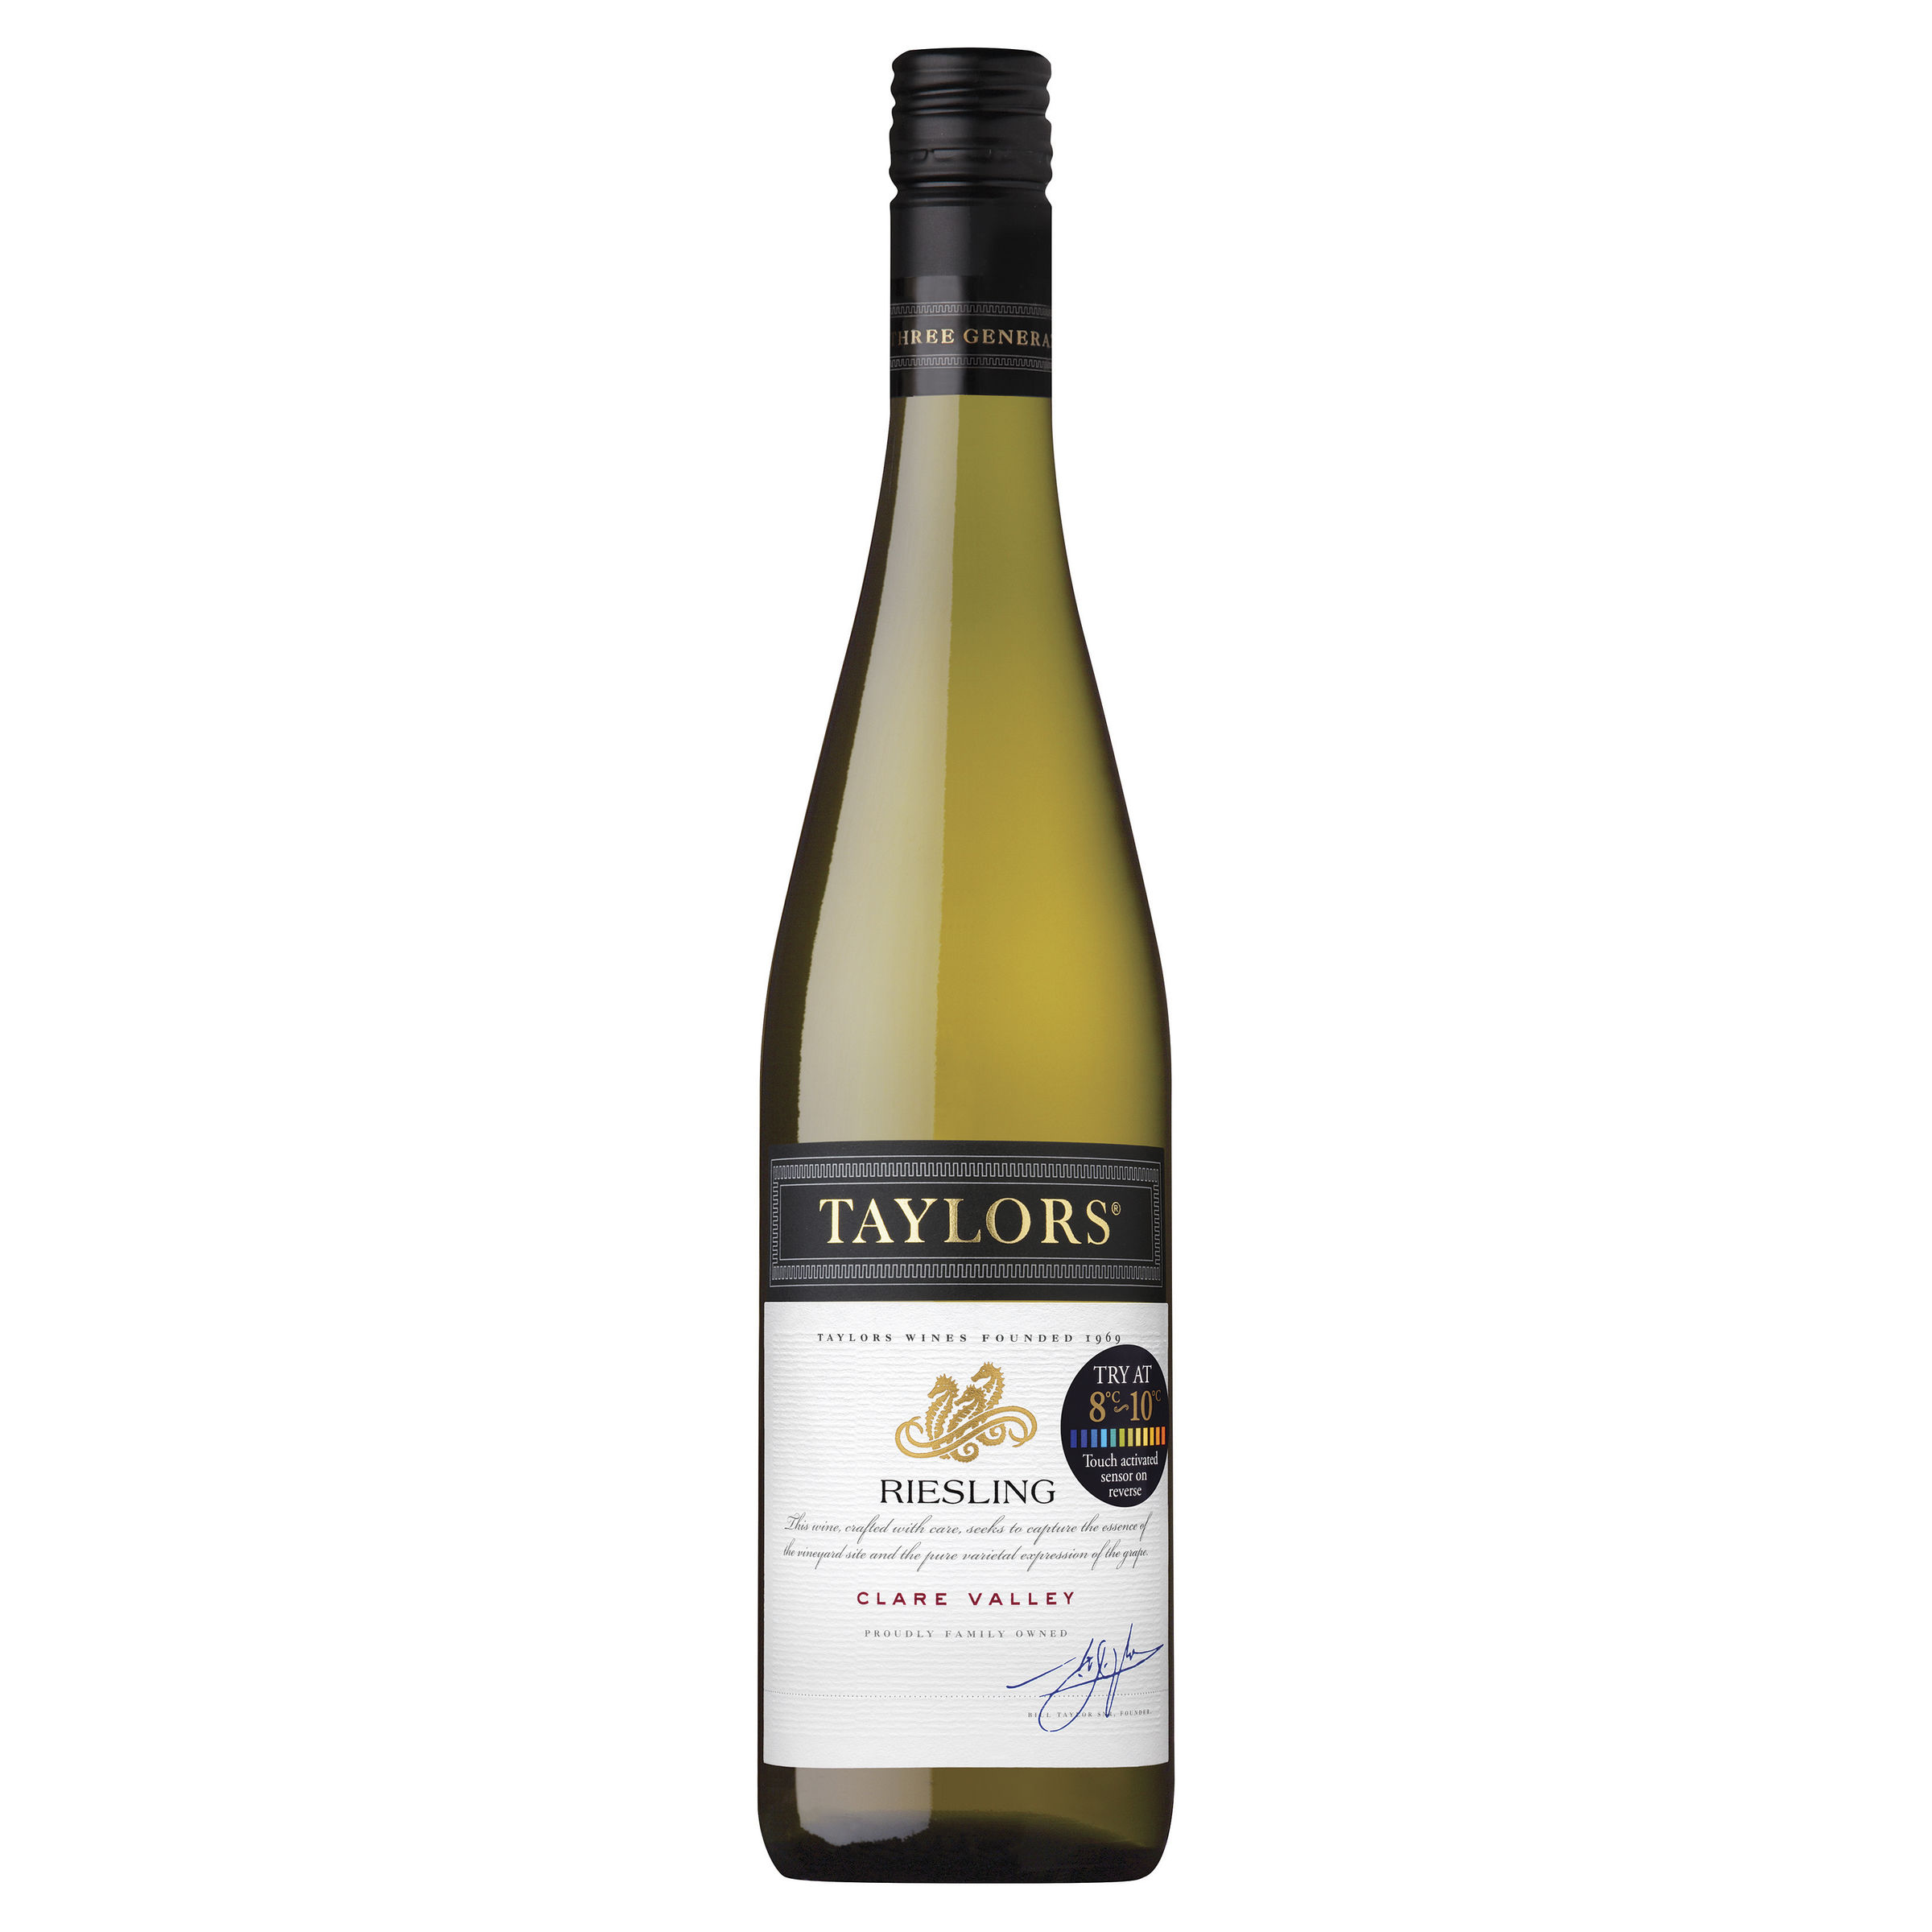 TAYLORS ESTATE RIESLING